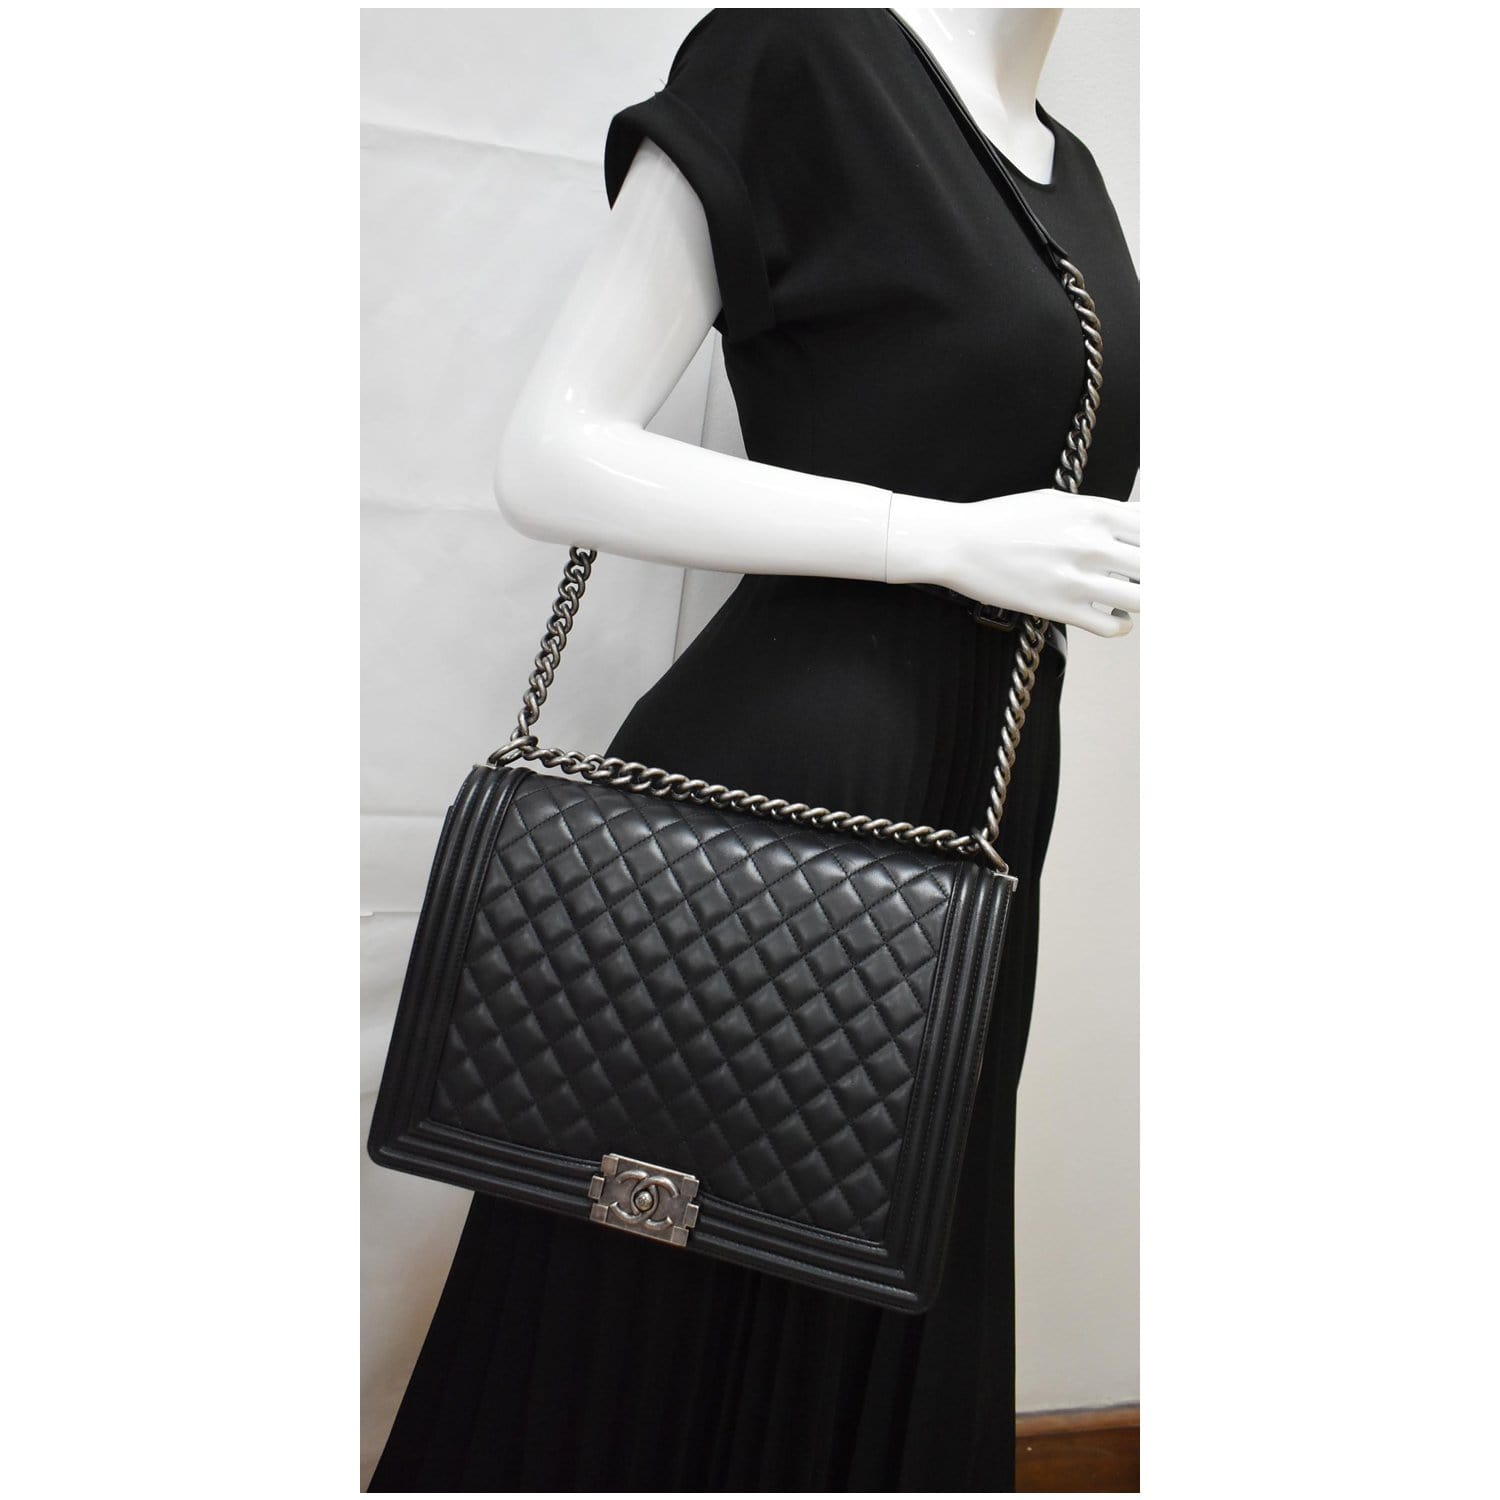 Black Chanel Mademoiselle Patent Leather Preowned Bowling Bag